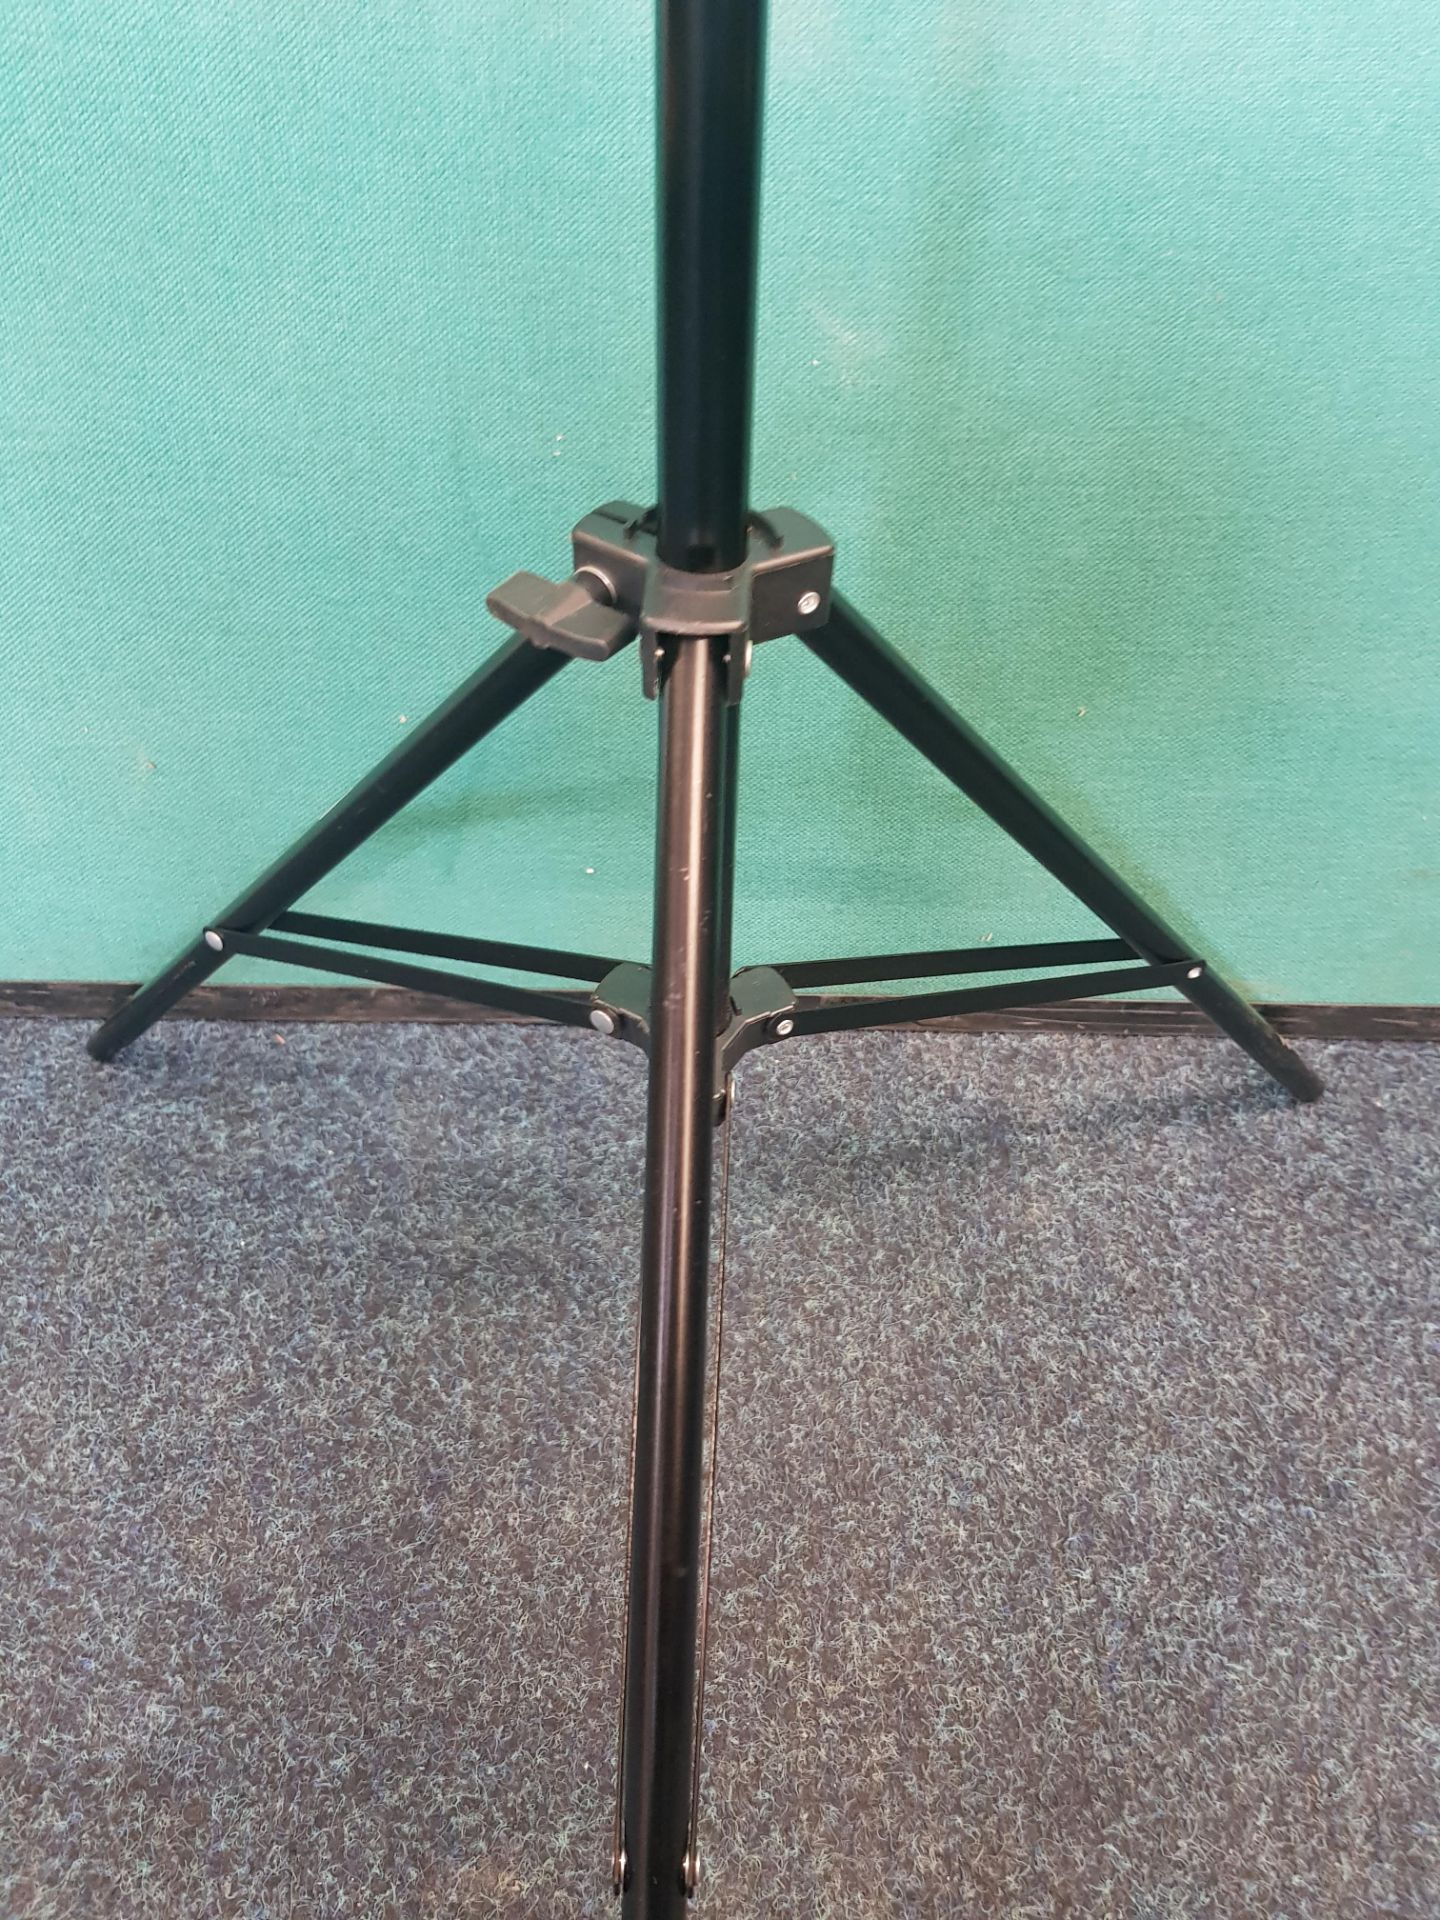 Adjustable Camera Stand - Image 2 of 4